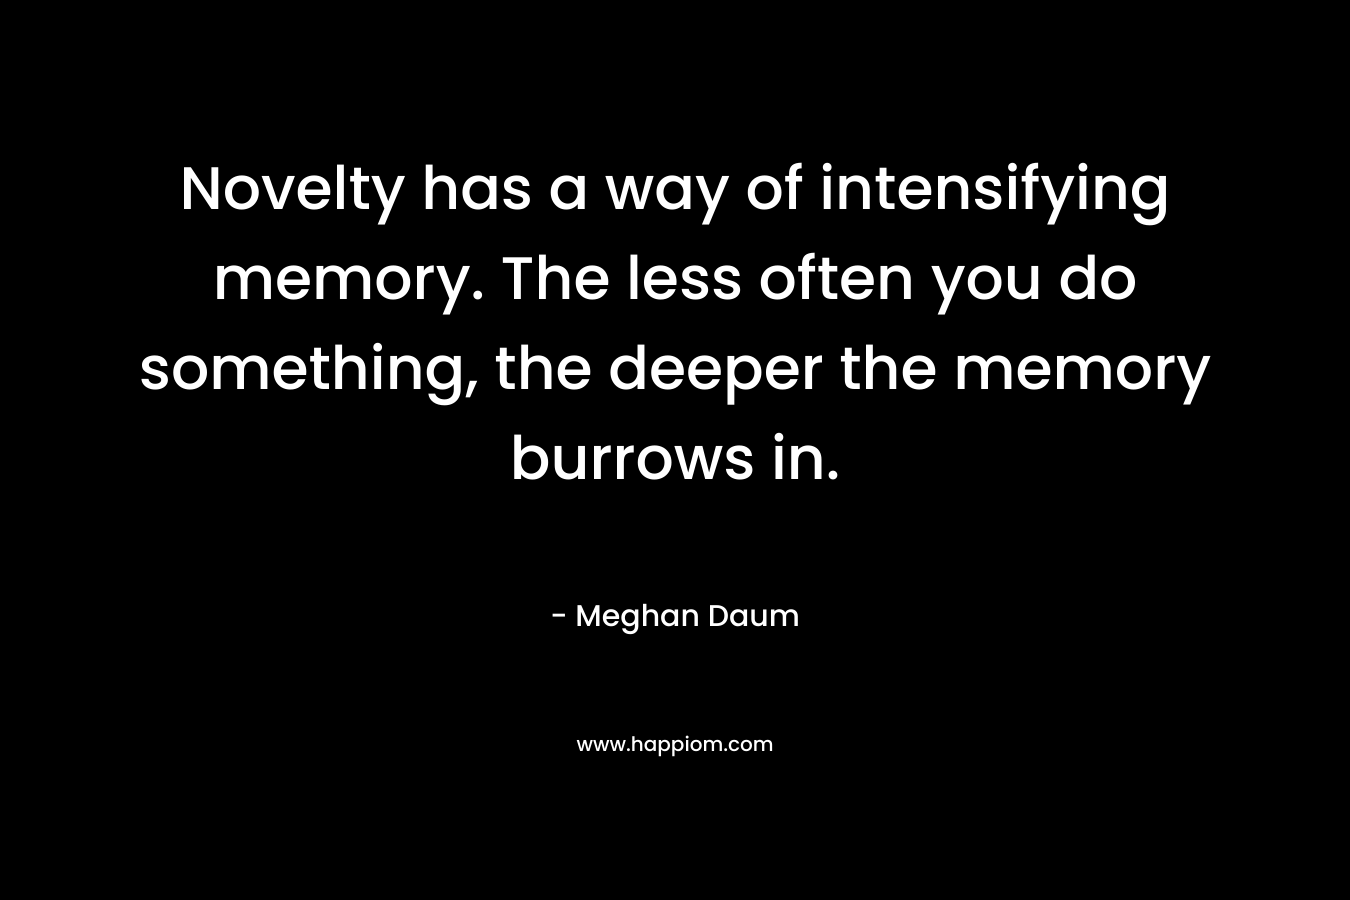 Novelty has a way of intensifying memory. The less often you do something, the deeper the memory burrows in.